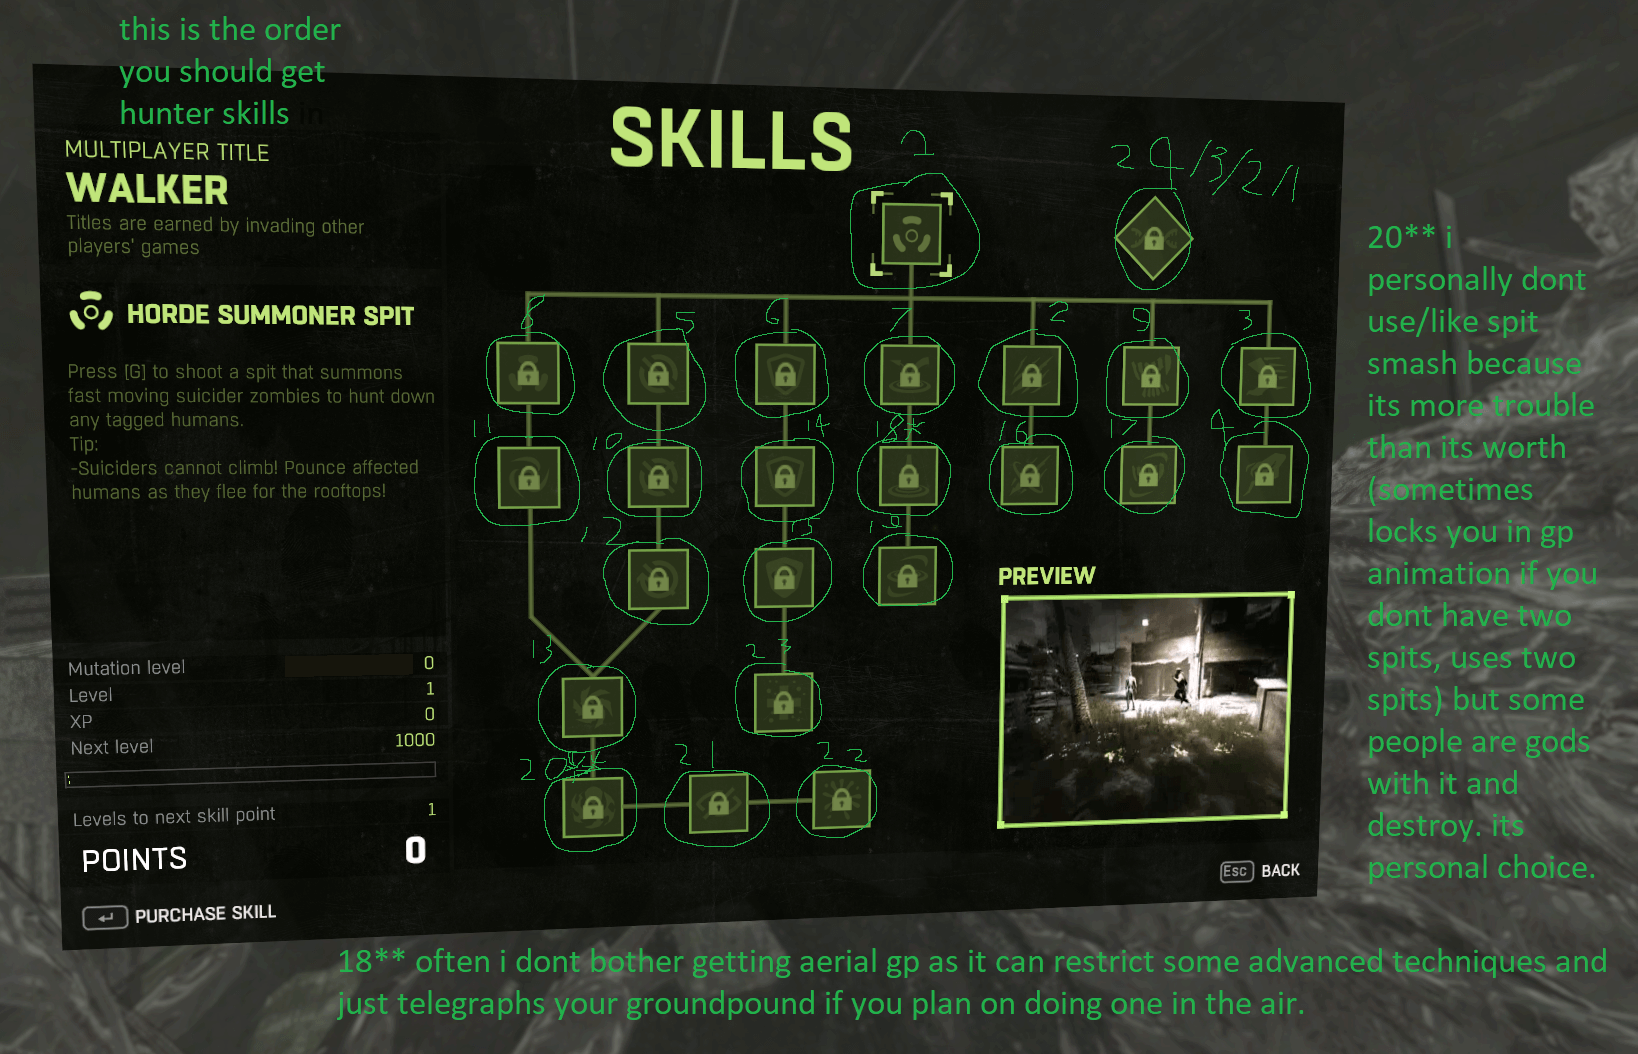 Dying Light - night hunter help Guide (ms paint drawings included) - skill order